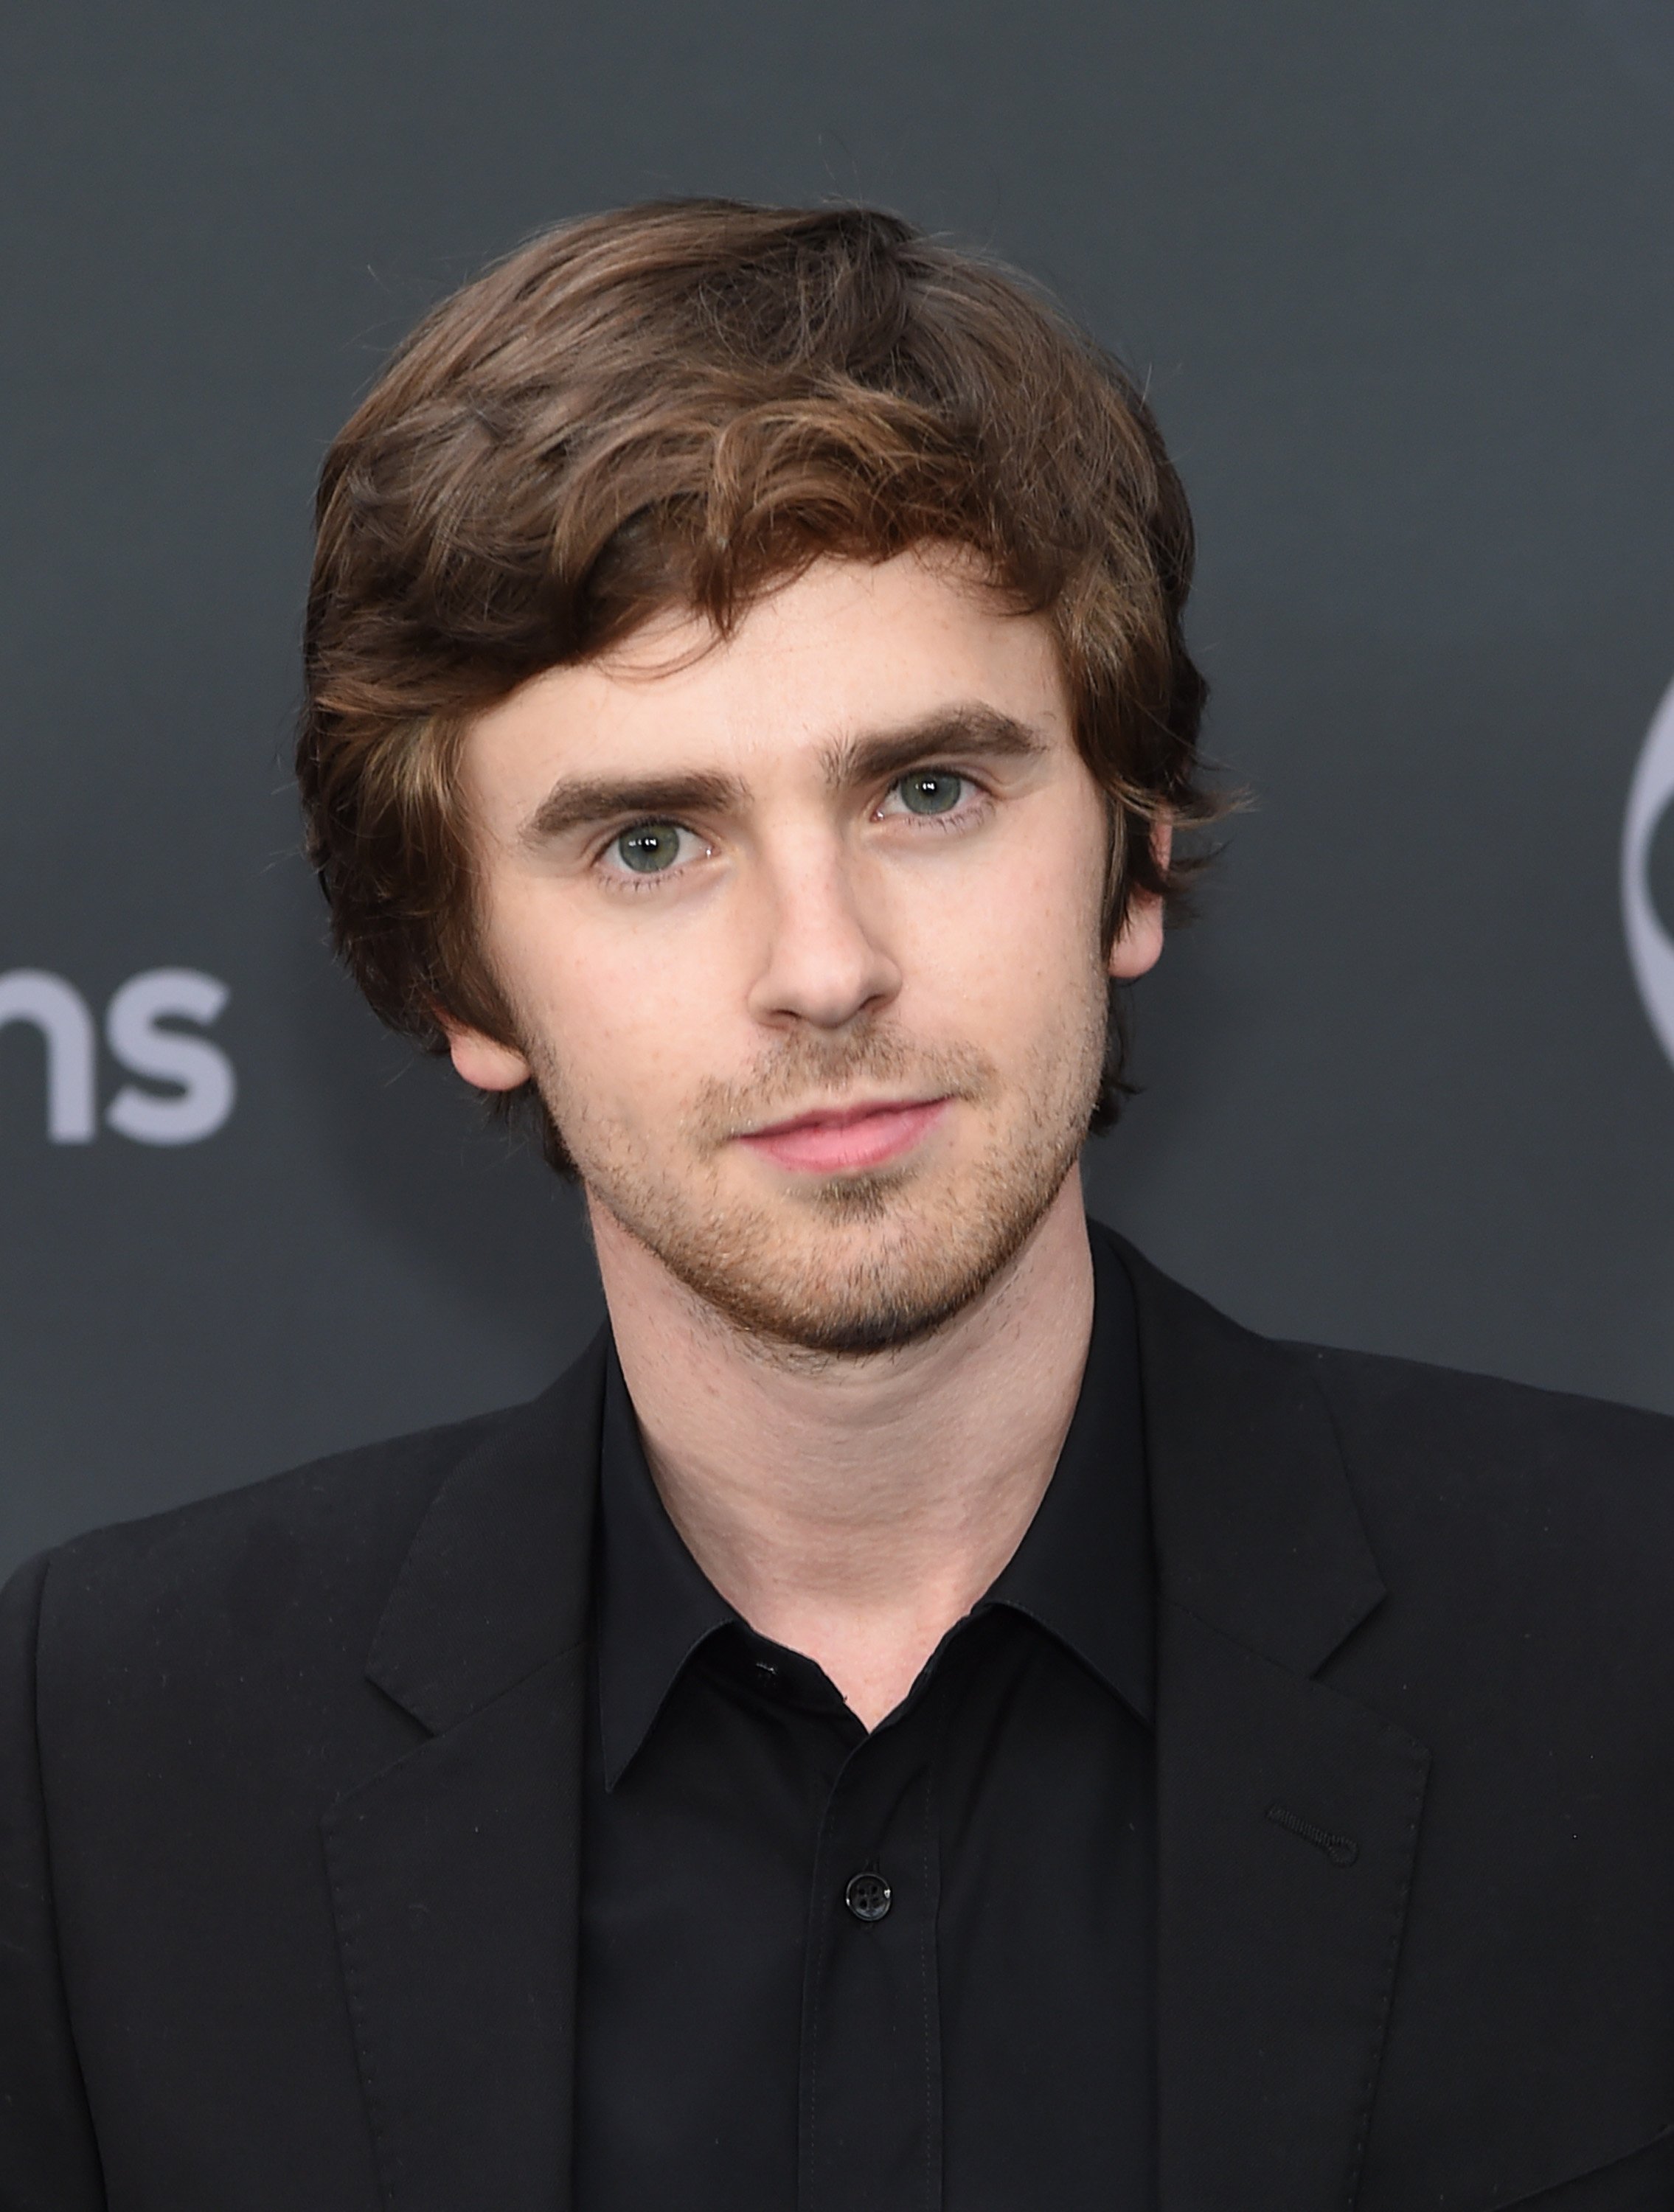 Freddie Highmore attends the ABC Walt Disney Television Upfront on May 14, 2019 in New York City | Photo: Getty Images